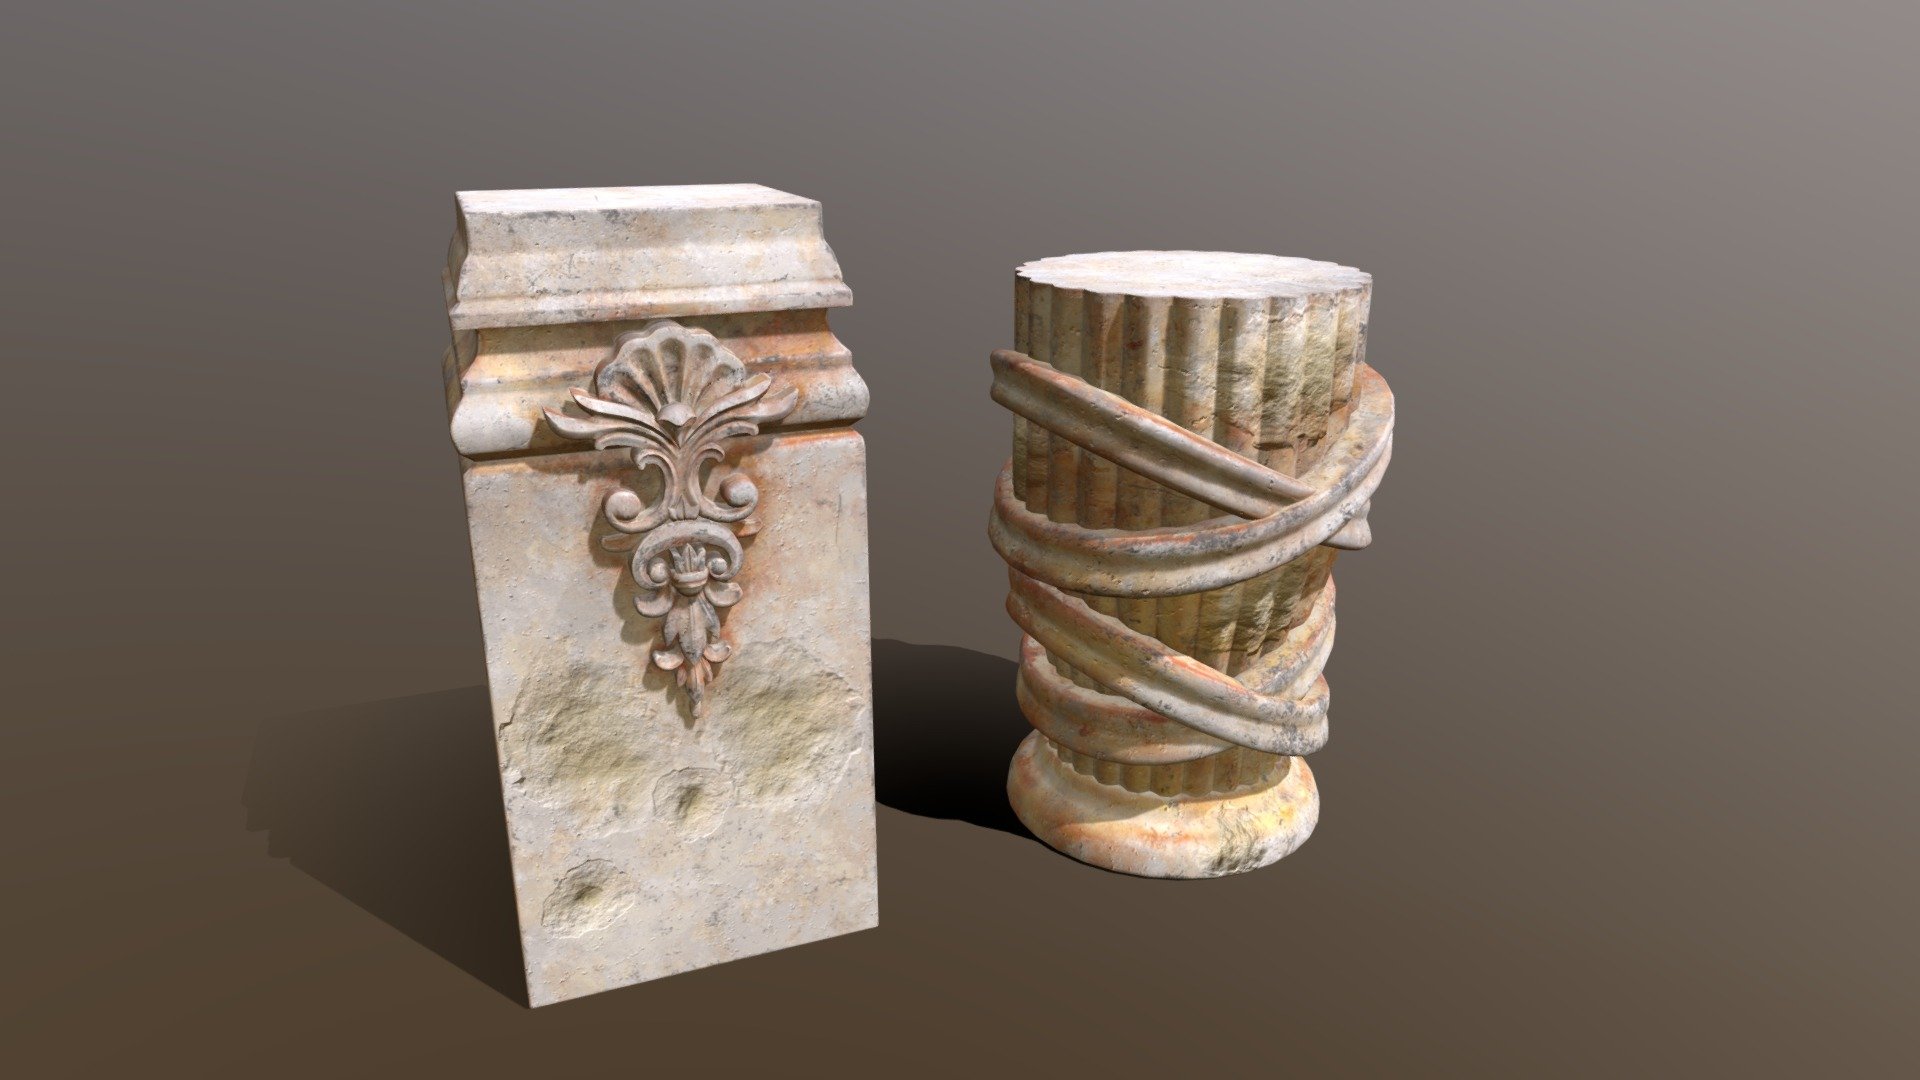 Marble Floral Garden Decoration 3D Model. This model contains the Marble Floral Garden Decoration itself 

All modeled in Maya, textured with Substance Painter.

The model was built to scale and is UV unwrapped properly. Contains a 4K UDIM Texture set. 2 Islands. Udim-1 and Udim-2 

⦁   23412 tris. 

⦁   Contains: .FBX .OBJ and .DAE

⦁   Model has clean topology. No Ngons.

⦁   Built to scale

⦁   Unwrapped UV Map

⦁   4K Texture set

⦁   High quality details

⦁   Based on real life references

⦁   Renders done in Marmoset Toolbag

Polycount: 

Verts 12433

Edges 24212 

Faces 11802

Tris 23412

If you have any questions please feel free to ask me 3d model